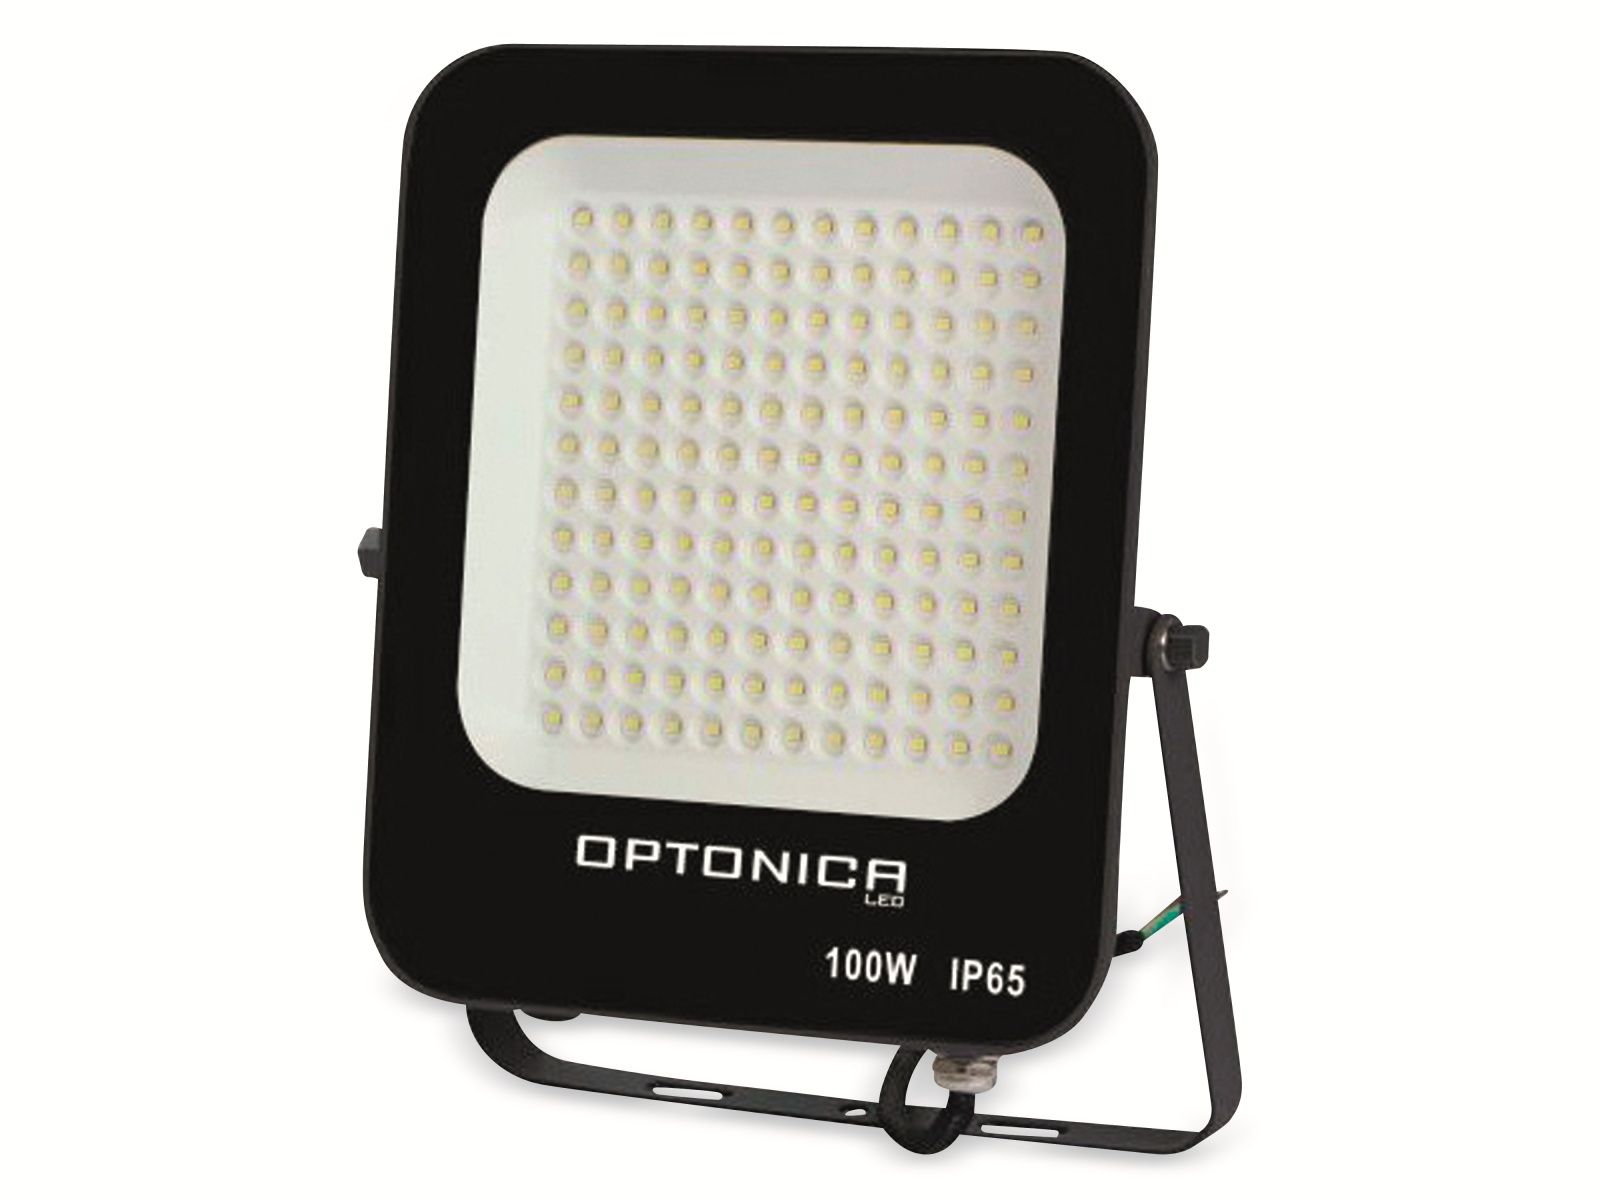 OPTONICA LED-Fluter, 100 W, 9000 lm, IP65, 4500 K von Optonica